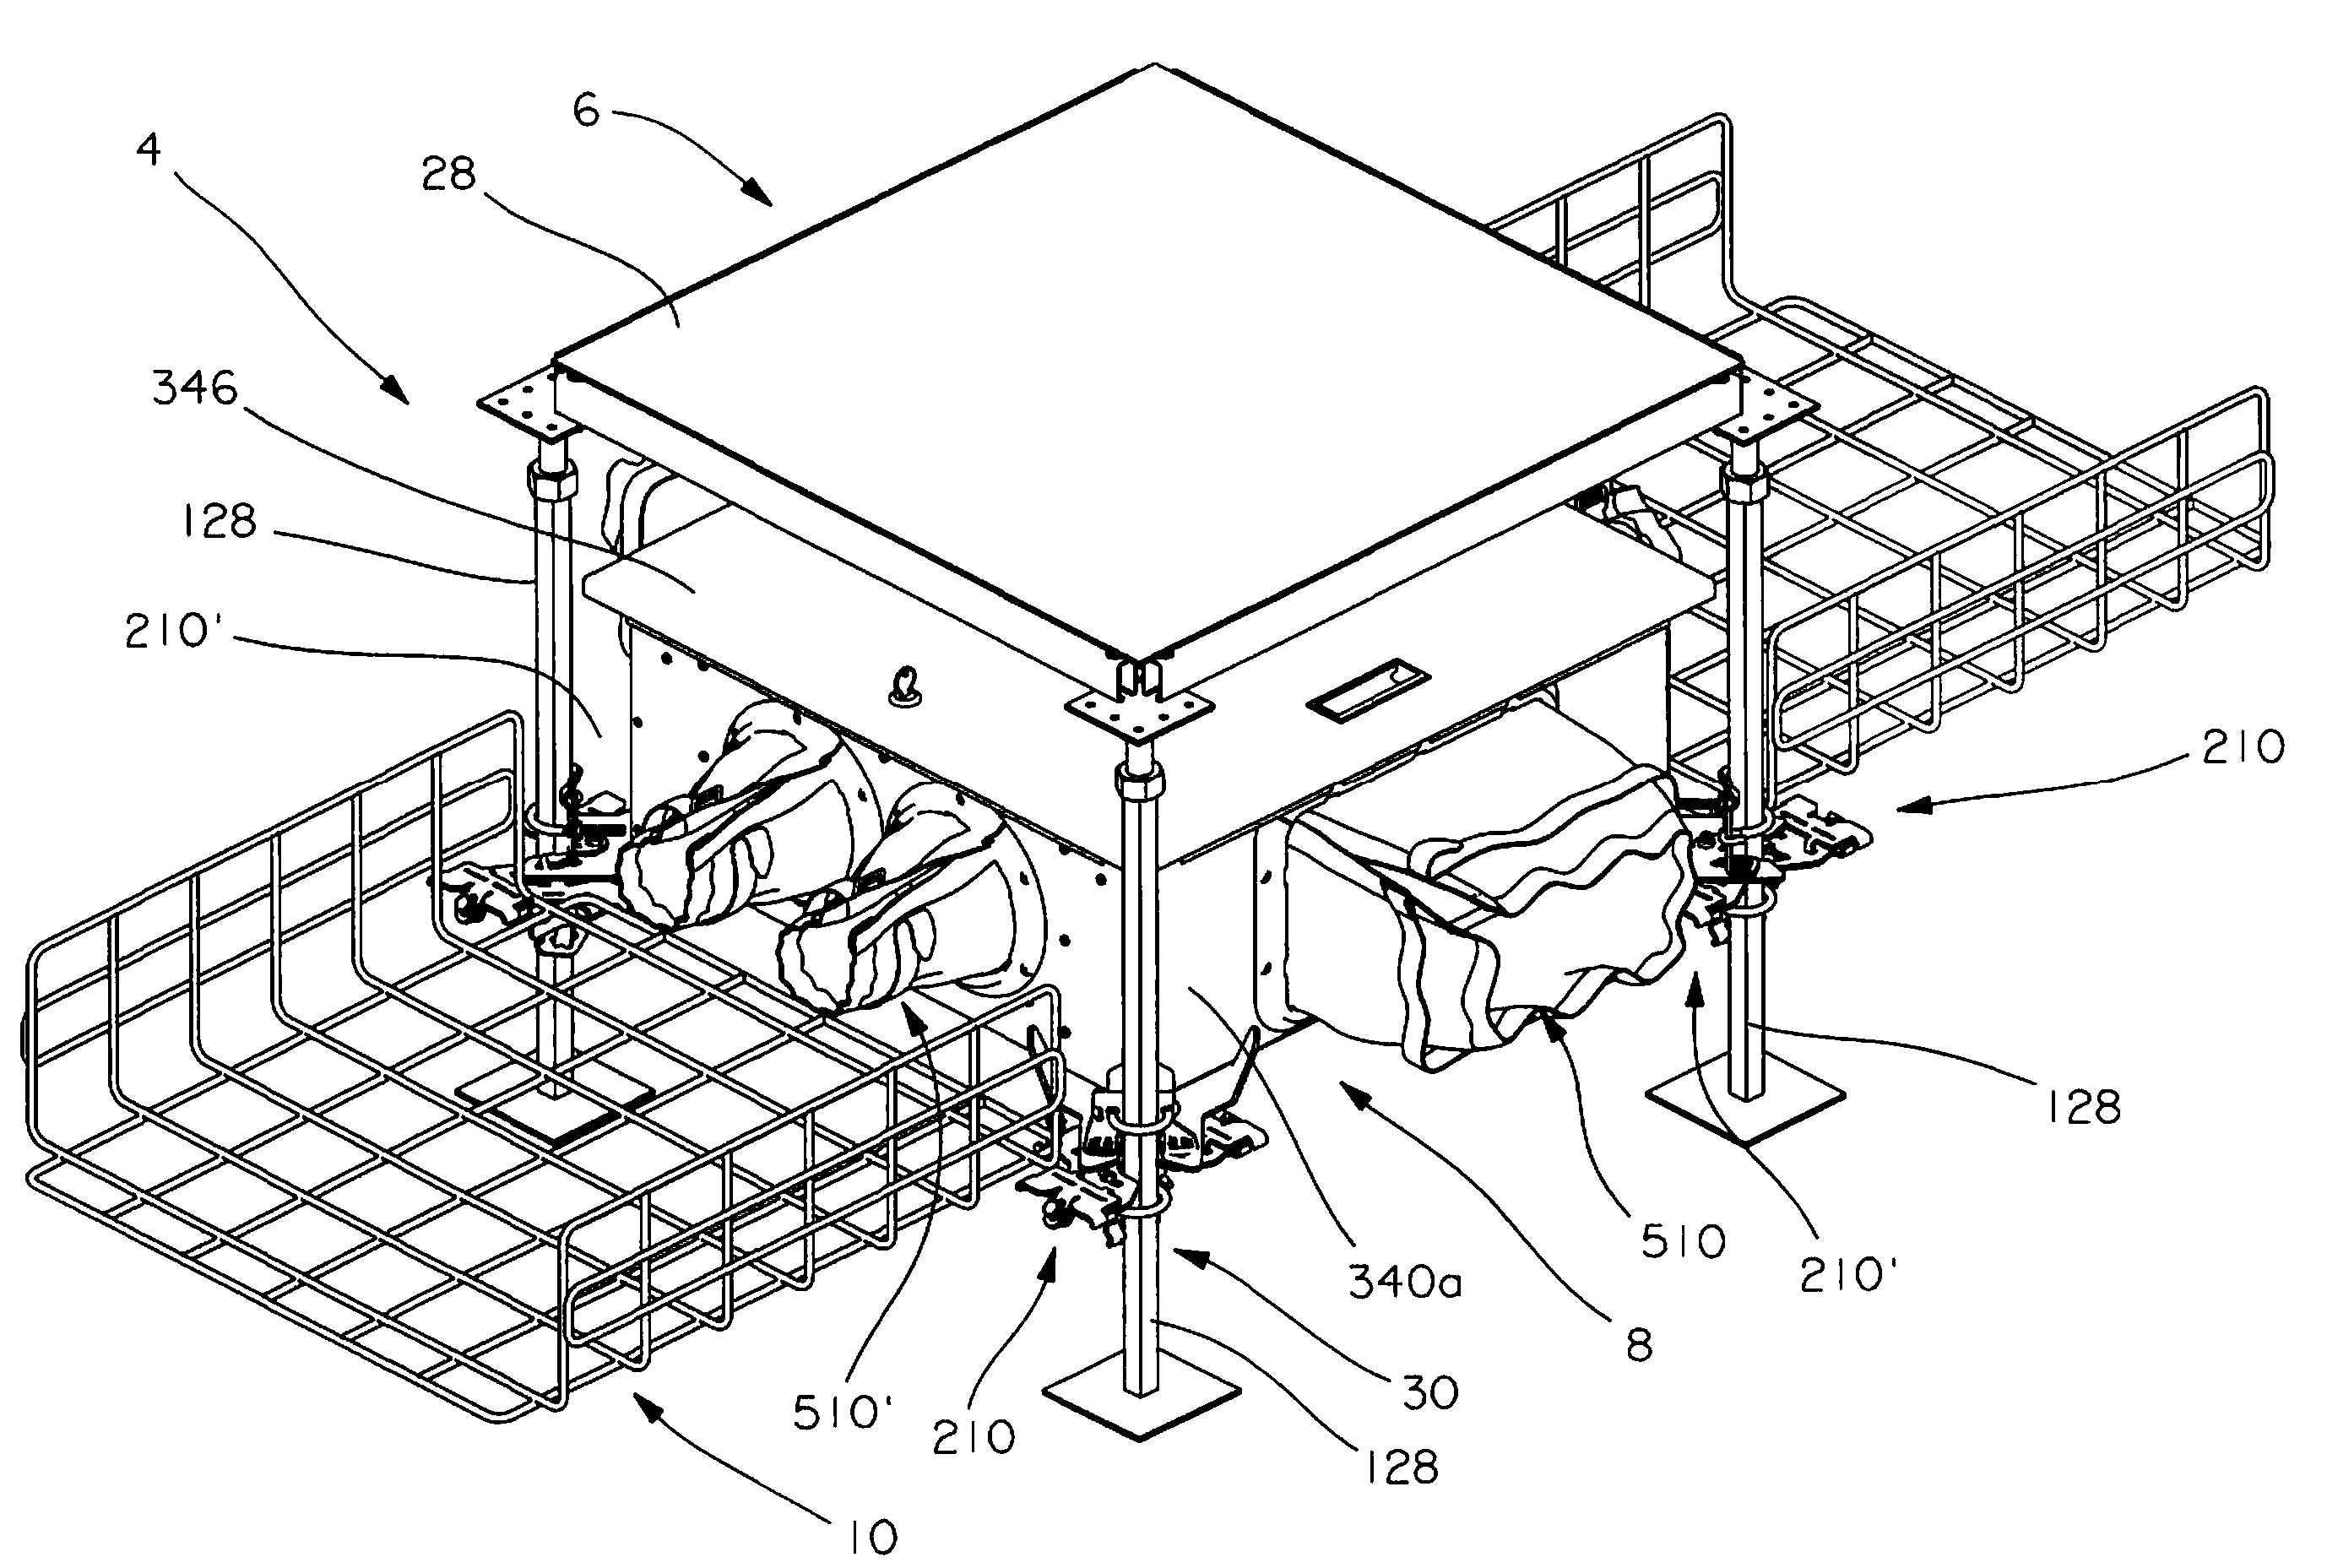 Cable management system for a raised floor grid system